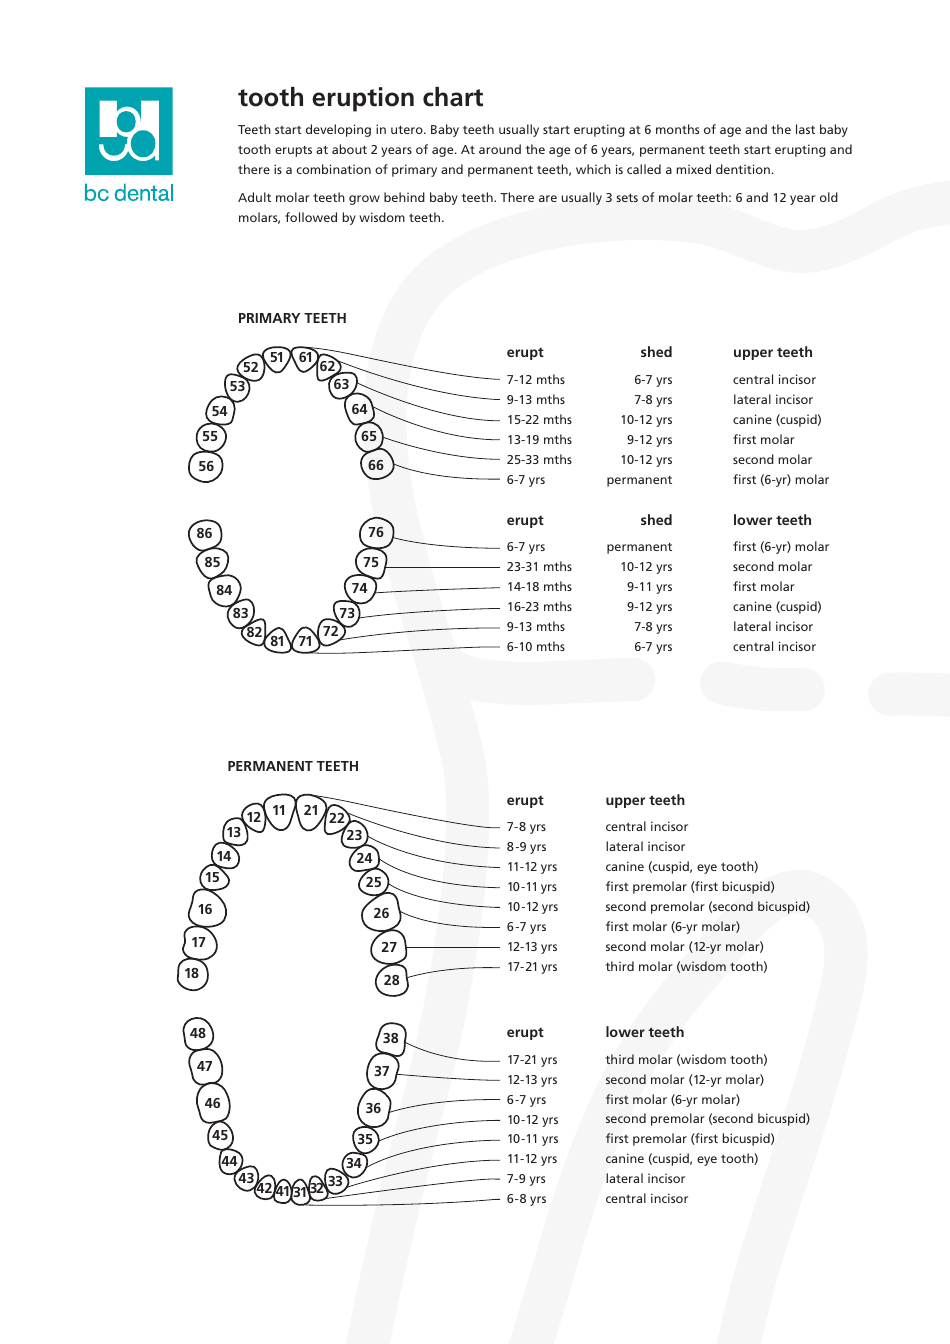 Tooth Eruption Chart image preview showing a guide for the timing and sequence of tooth eruption in children.